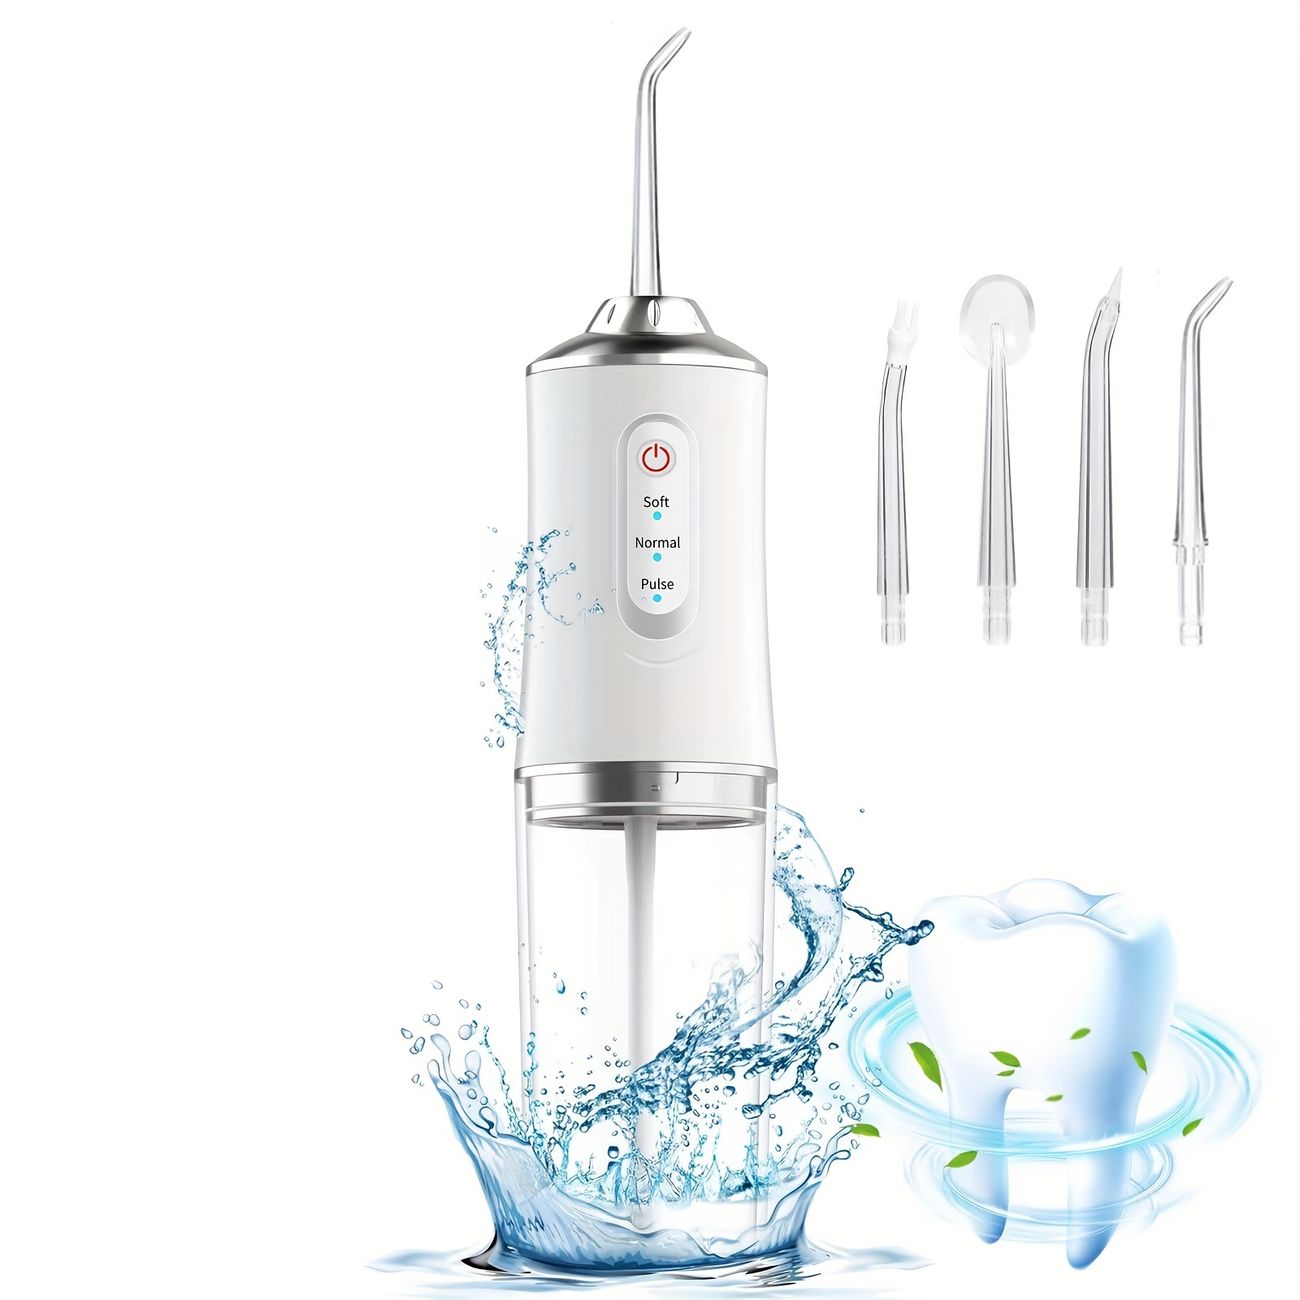 4 in 1 water flosser for teeth cordless water flossers oral irrigator with diy mode 4 jet tips tooth flosser portable and rechargeable for home travel for men and women daily teeth care ideal for gift father day gift mother day gift 0